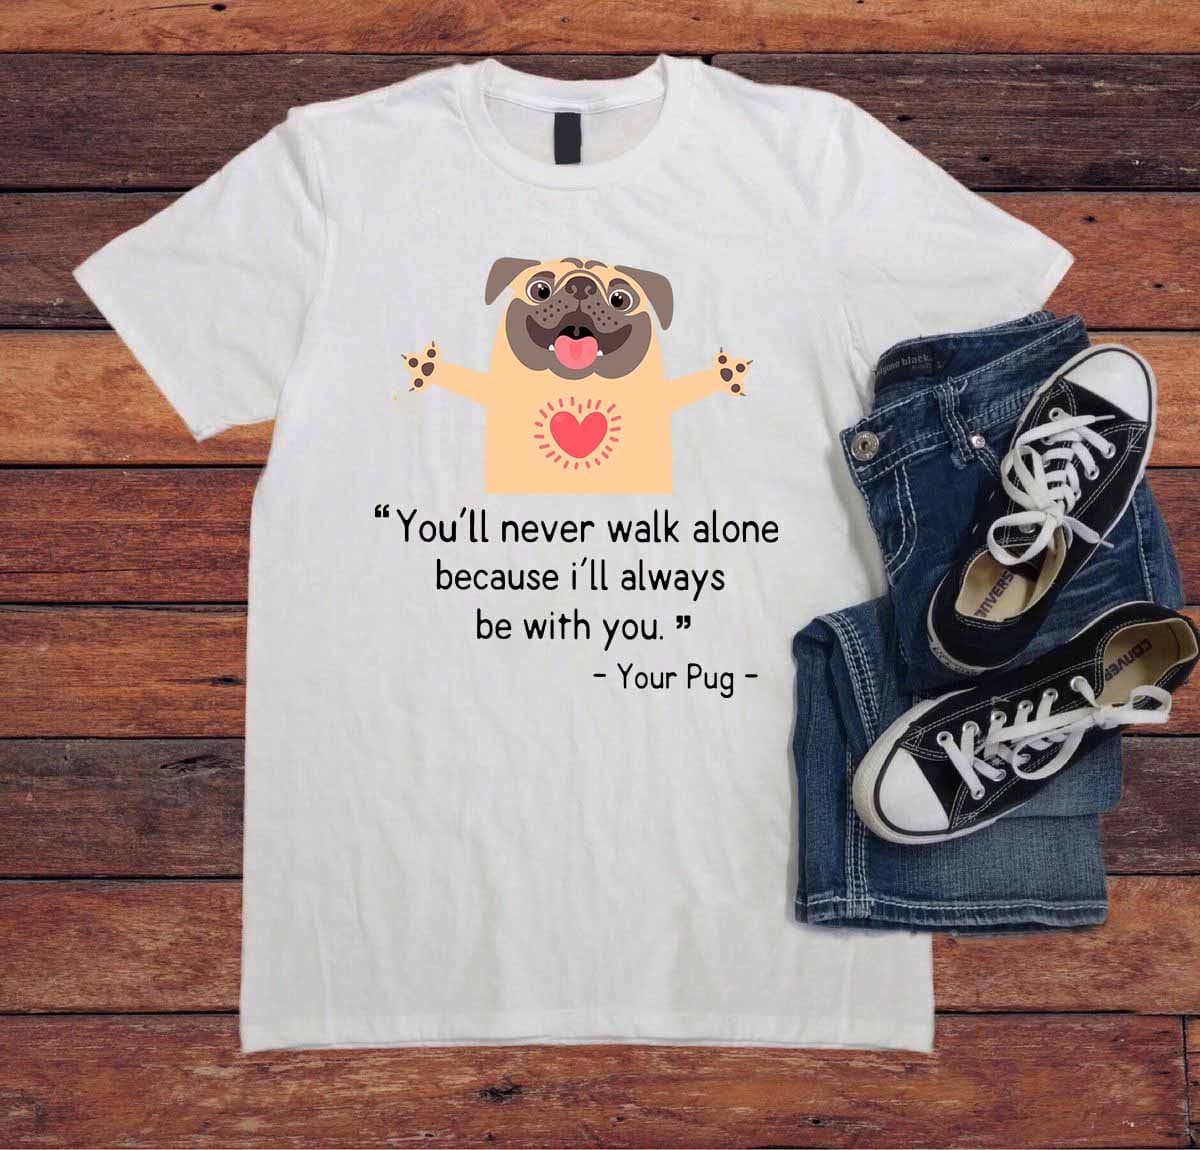 You'll never walk alone because I'll always be with you - Gift for pug lover, Pug dog graphic T-shirt